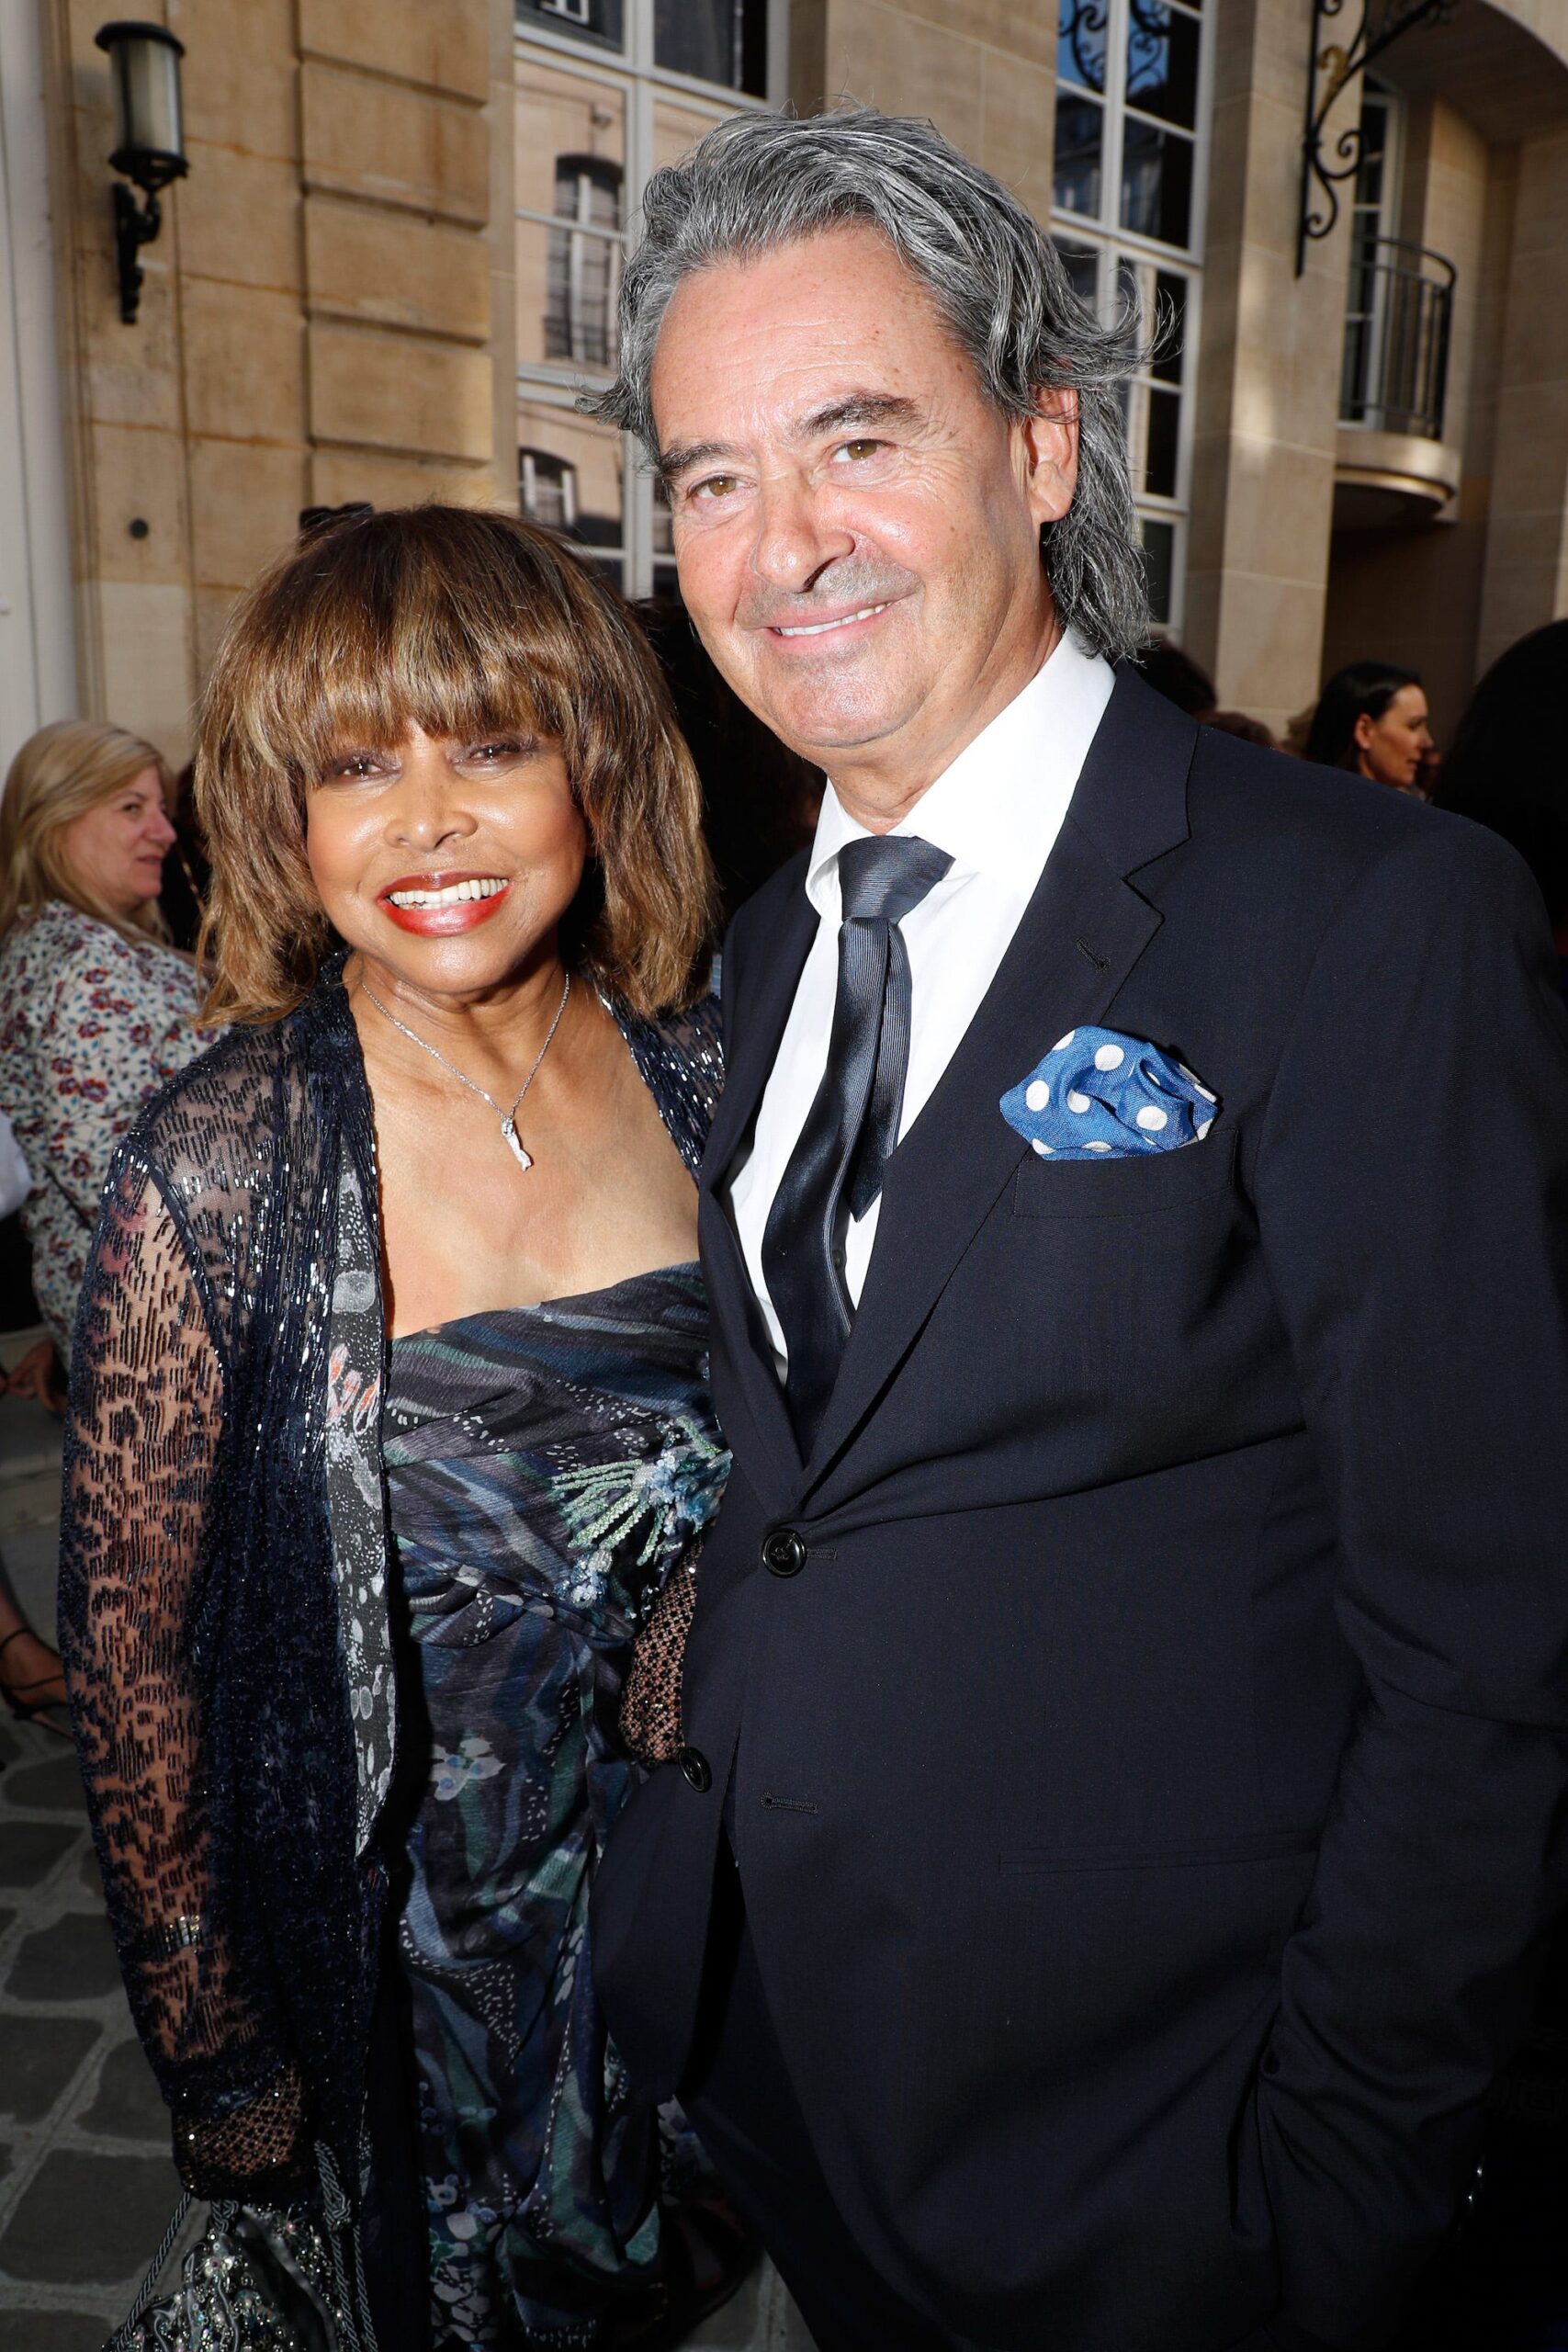 PARIS, FRANCE - JULY 03: Singer Tina Turner and her husband Erwin Bach attend the Giorgio Armani Prive Haute Couture Fall Winter 2018/2019 show as part of Paris Fashion Week on July 3, 2018 in Paris, France.